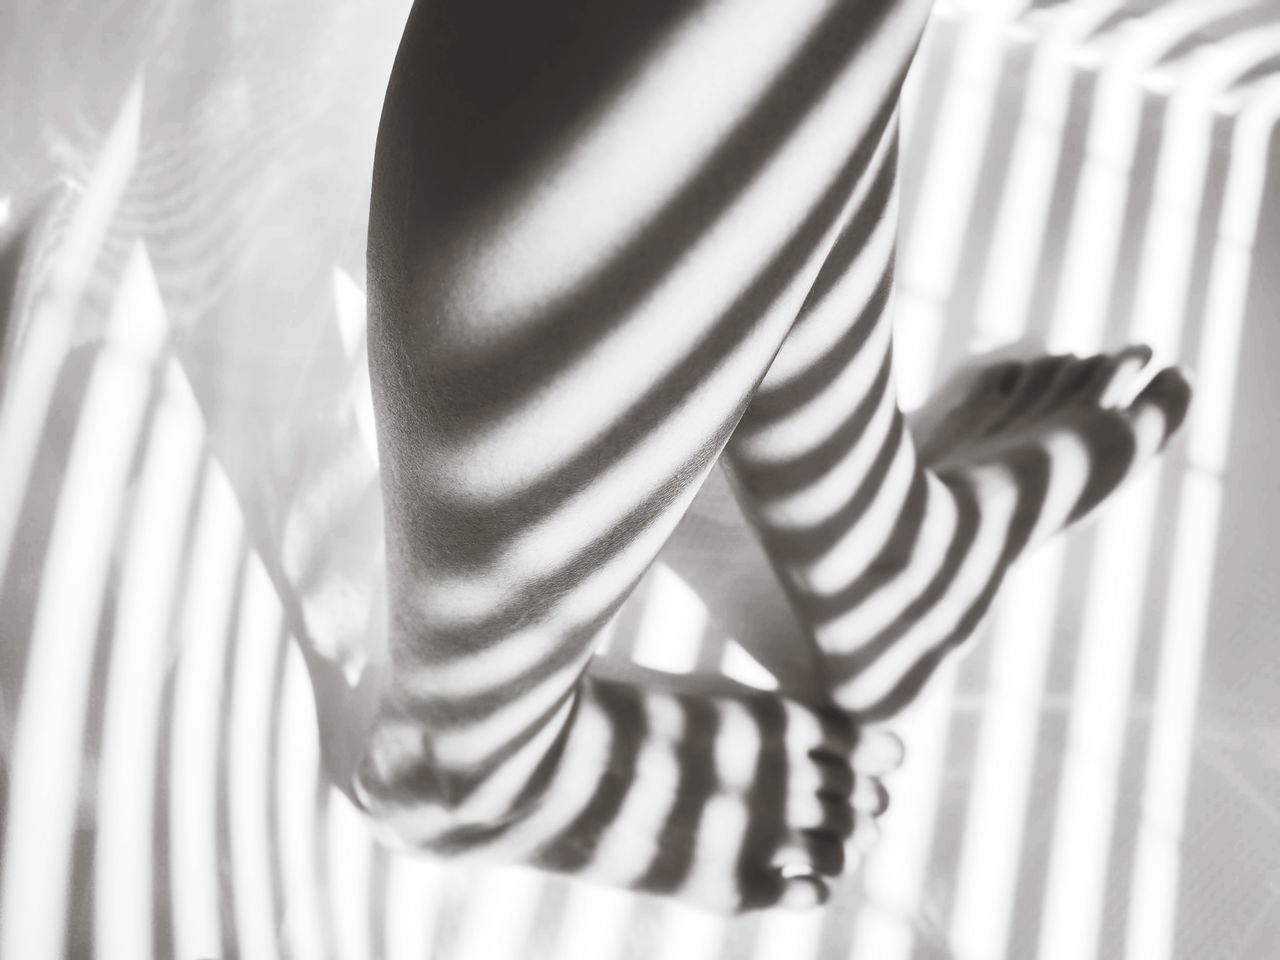 striped, black and white, one person, white, monochrome photography, midsection, indoors, shadow, monochrome, adult, arm, black, low section, pattern, sunlight, women, standing, zebra, curtain, lifestyles, human leg, clothing, close-up, day, limb